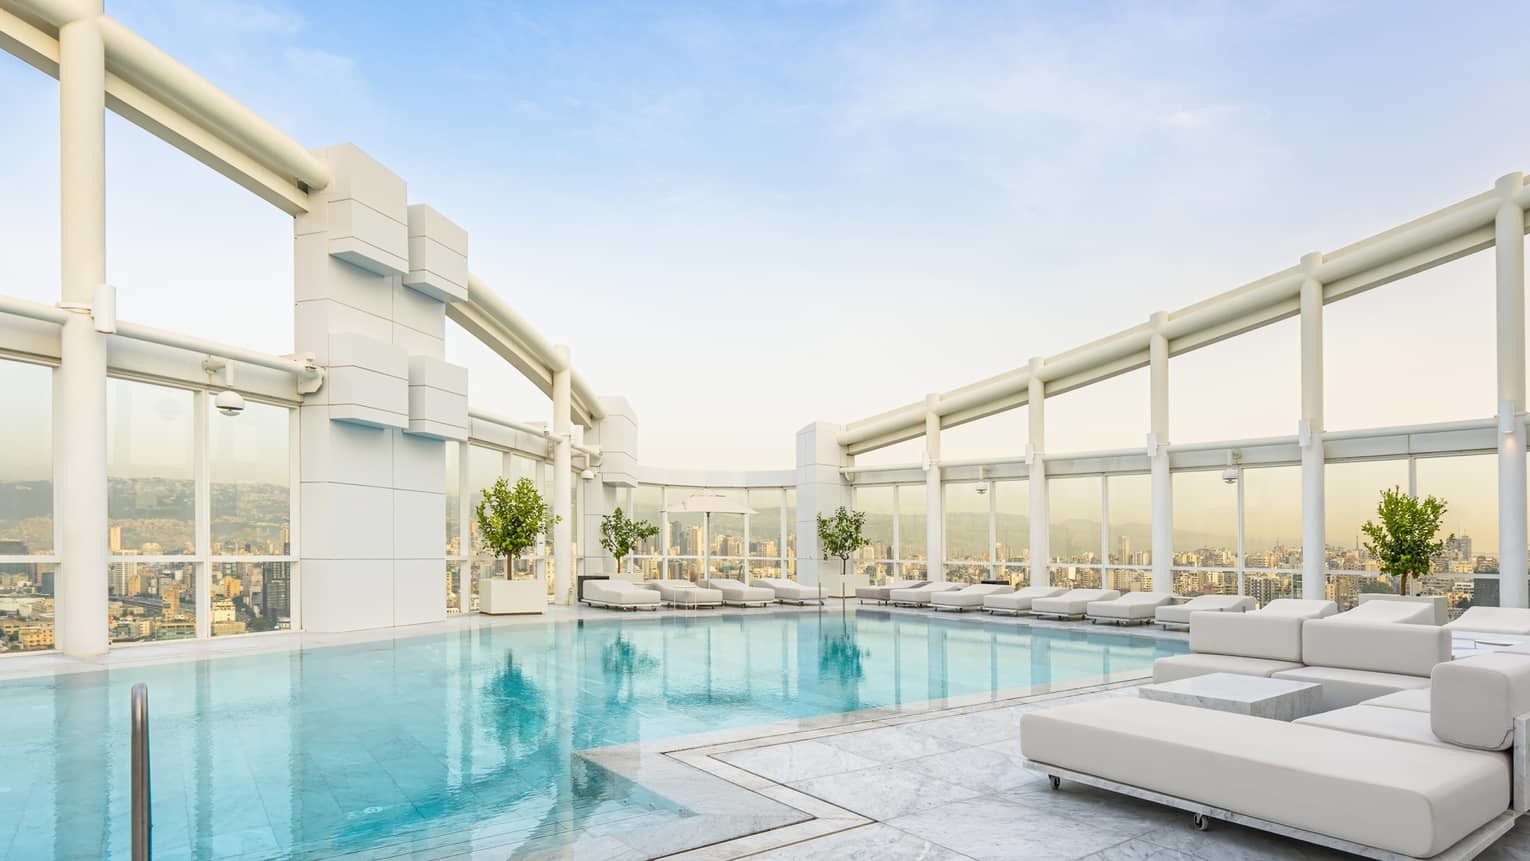 news-main-beiruts-highest-rooftop-pool-bar-and-loungs-reopens-at-four-seasons-hotel-beirut-with-a-refreshed-look-by-bernard-khoury.1561385180.jpg